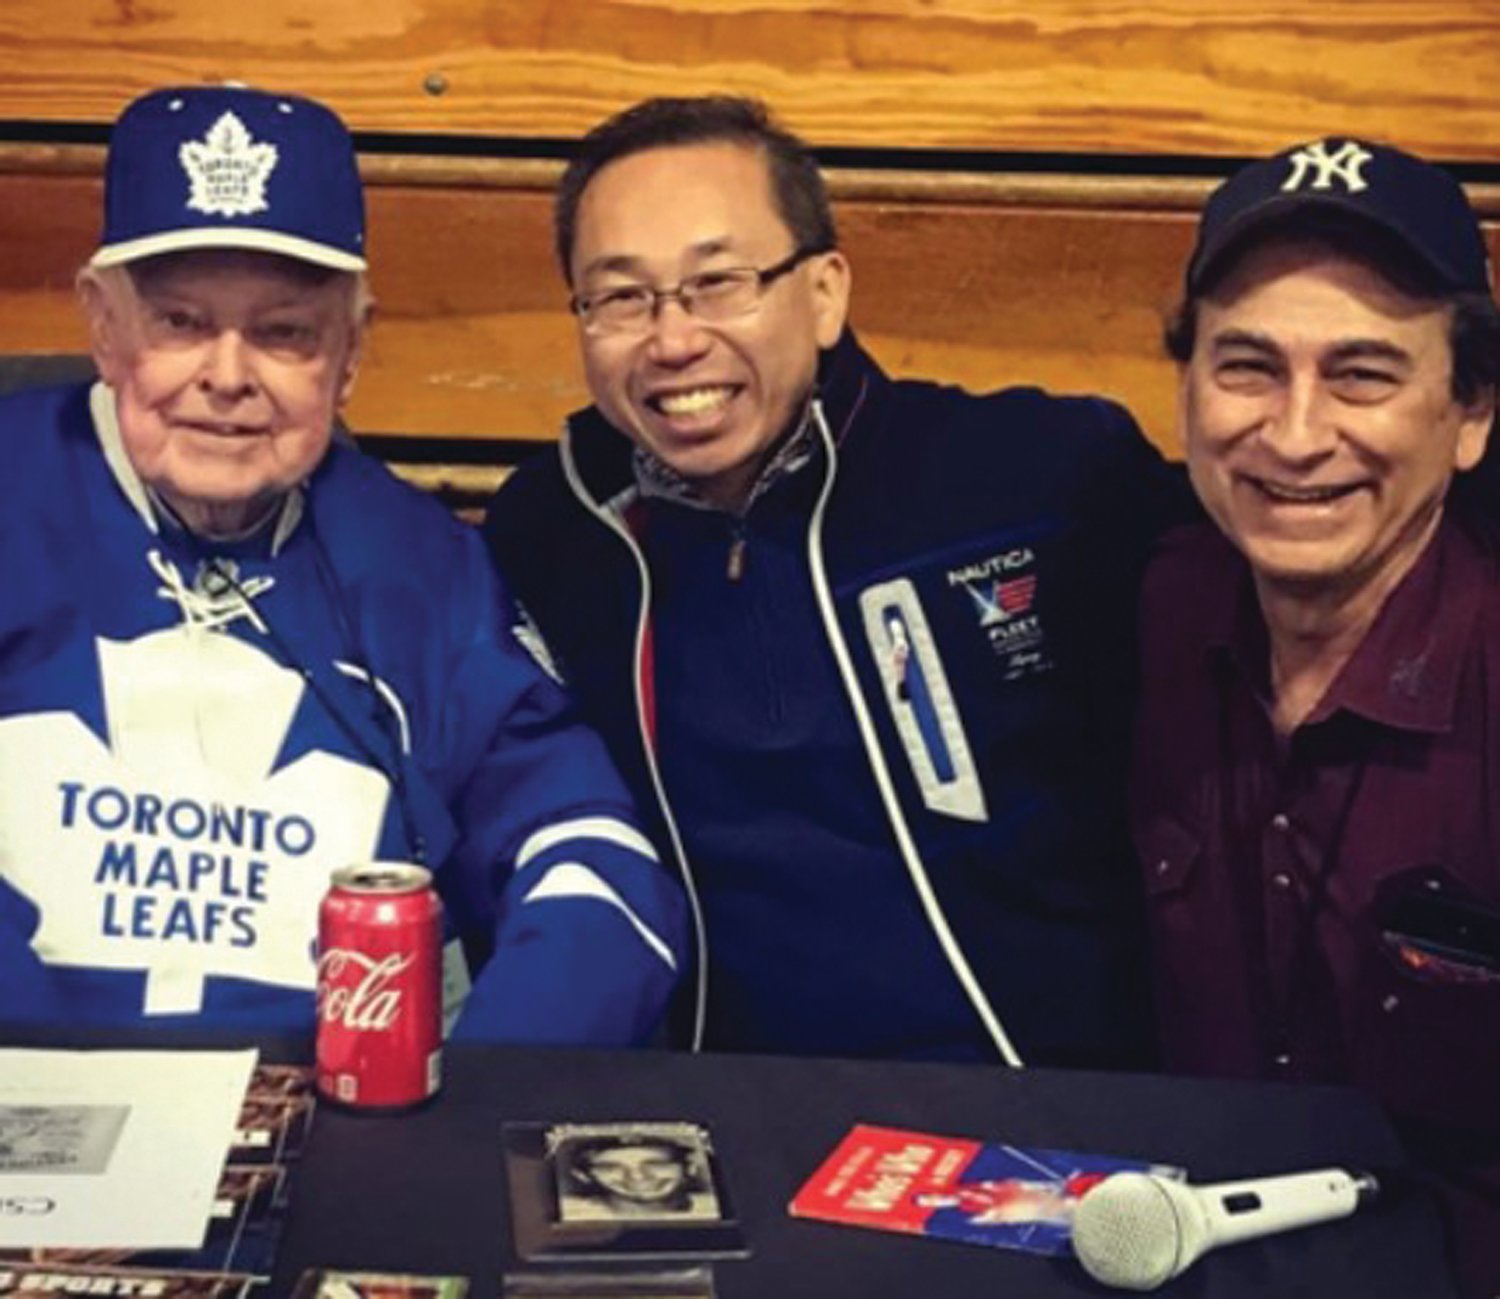 ORIGINAL CREW: Original Cranston Sports Card Show promoter Tom McDonough (left) handed responsibilities in 2017 to Mike Mangasarian (right). In between both of them is former Mayor of Cranston Allan Fung who is a frequent visitor